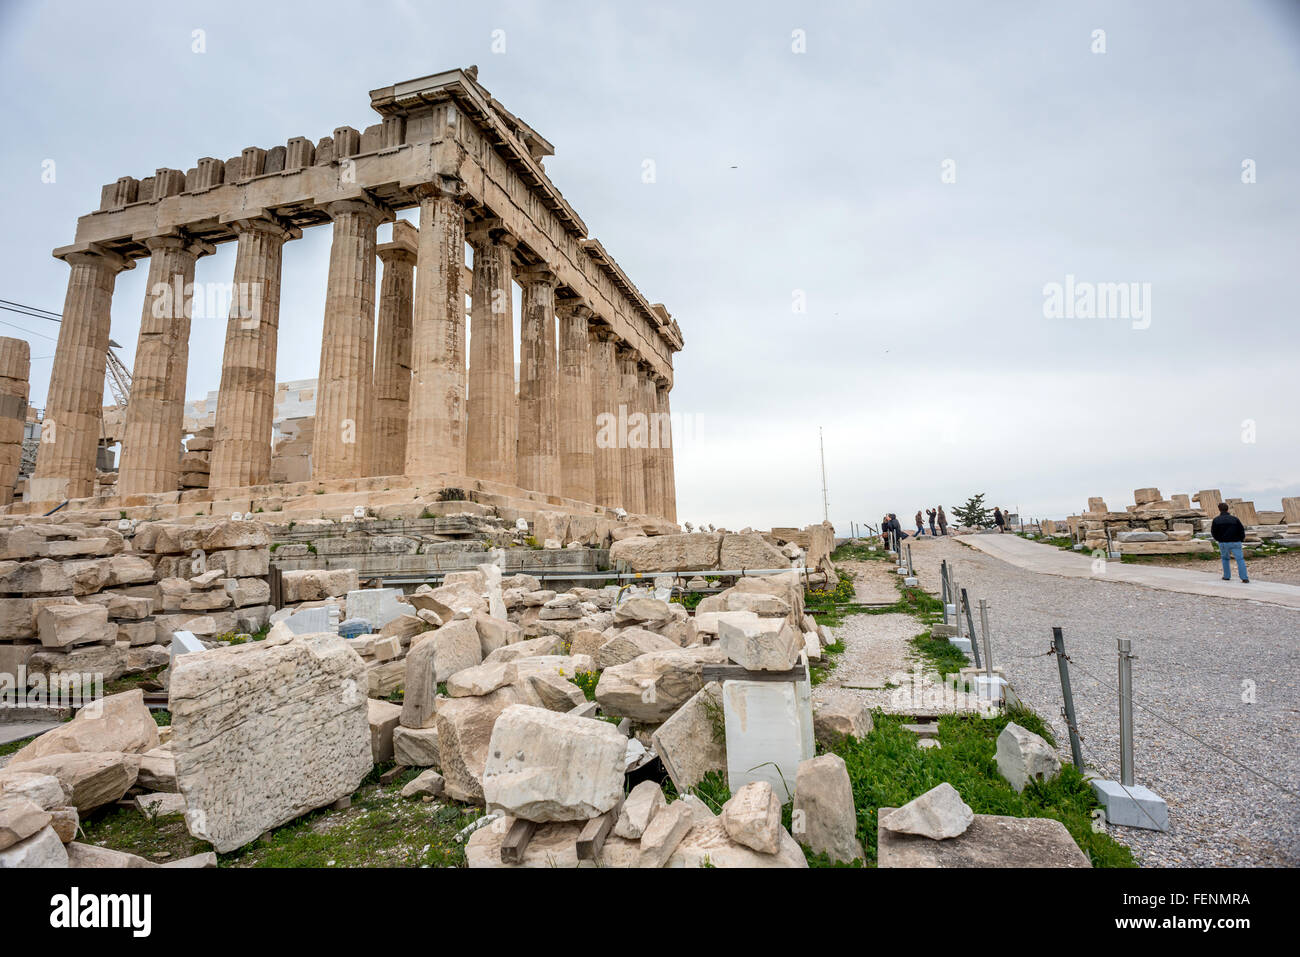 A view of The Parthenon, on top of The Acropolis in Athens Greece. Stock Photo